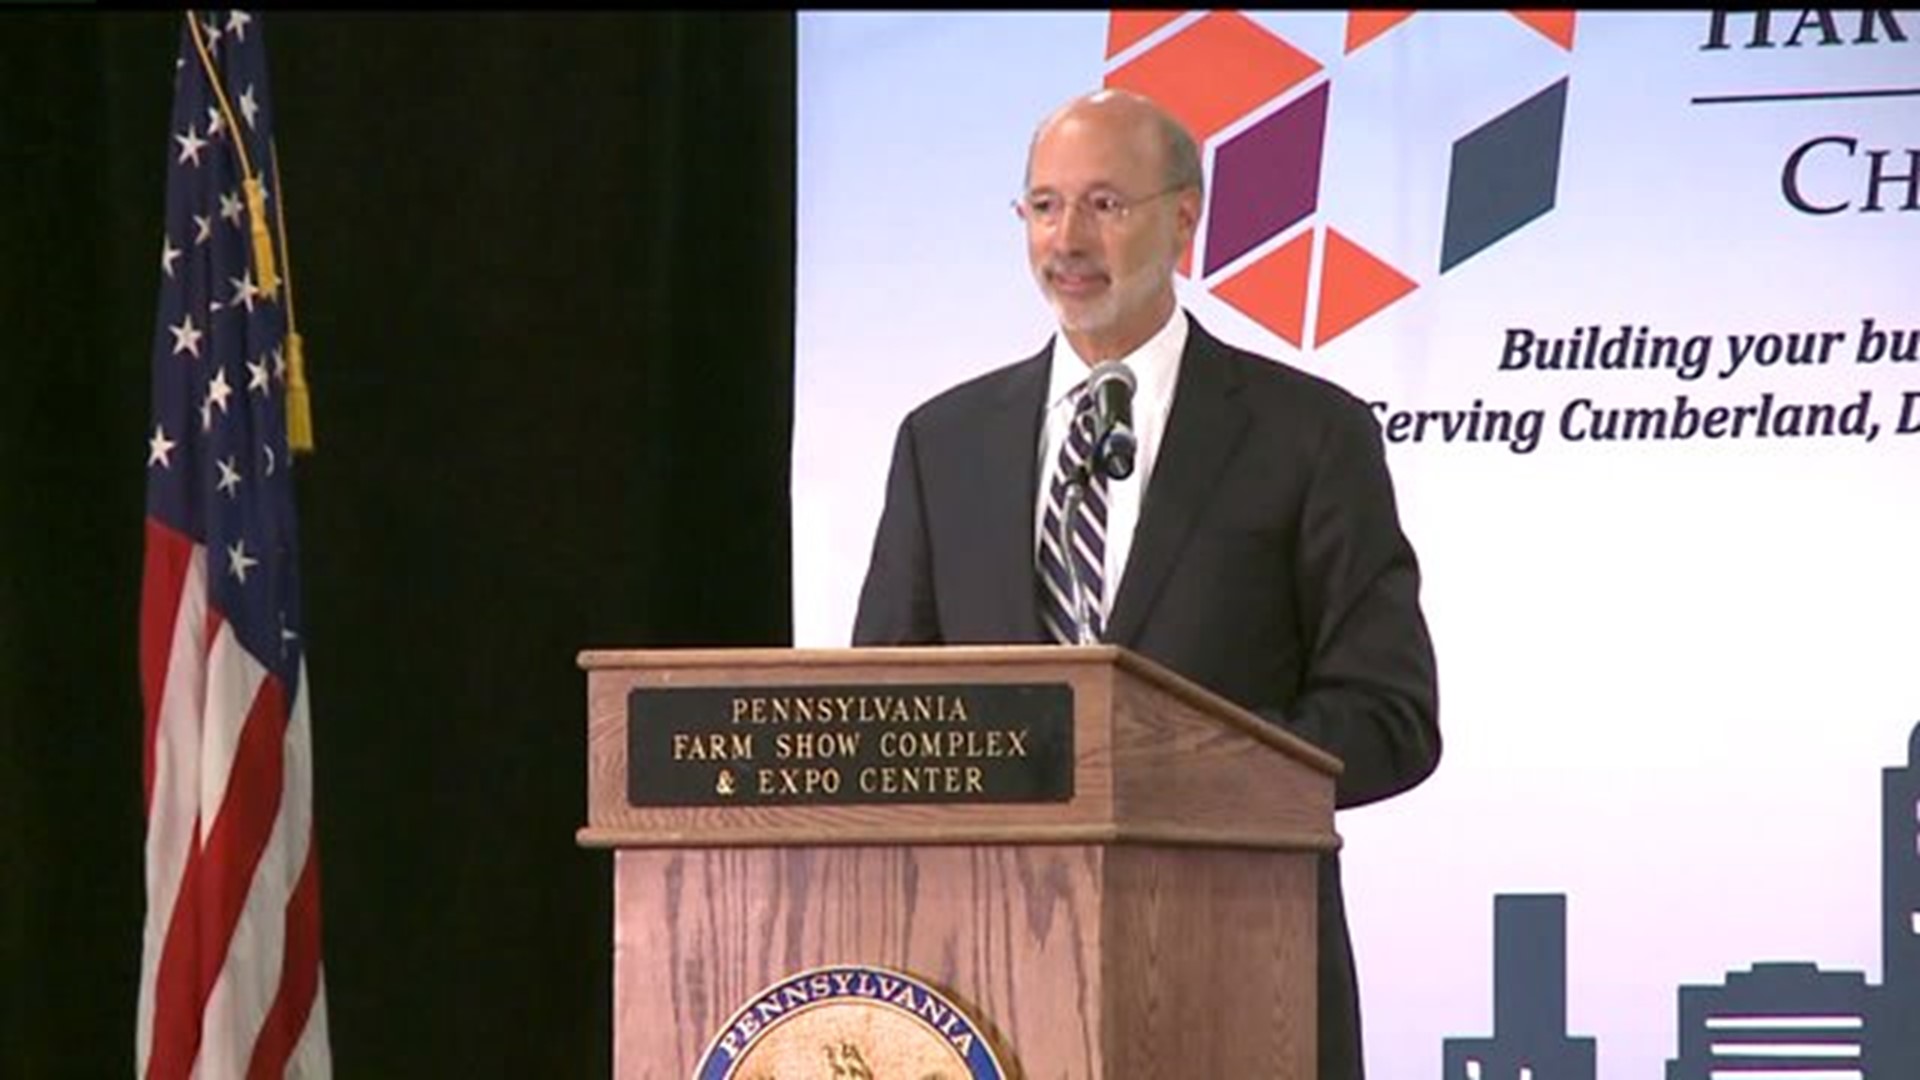 Governor Wolf addresses business community